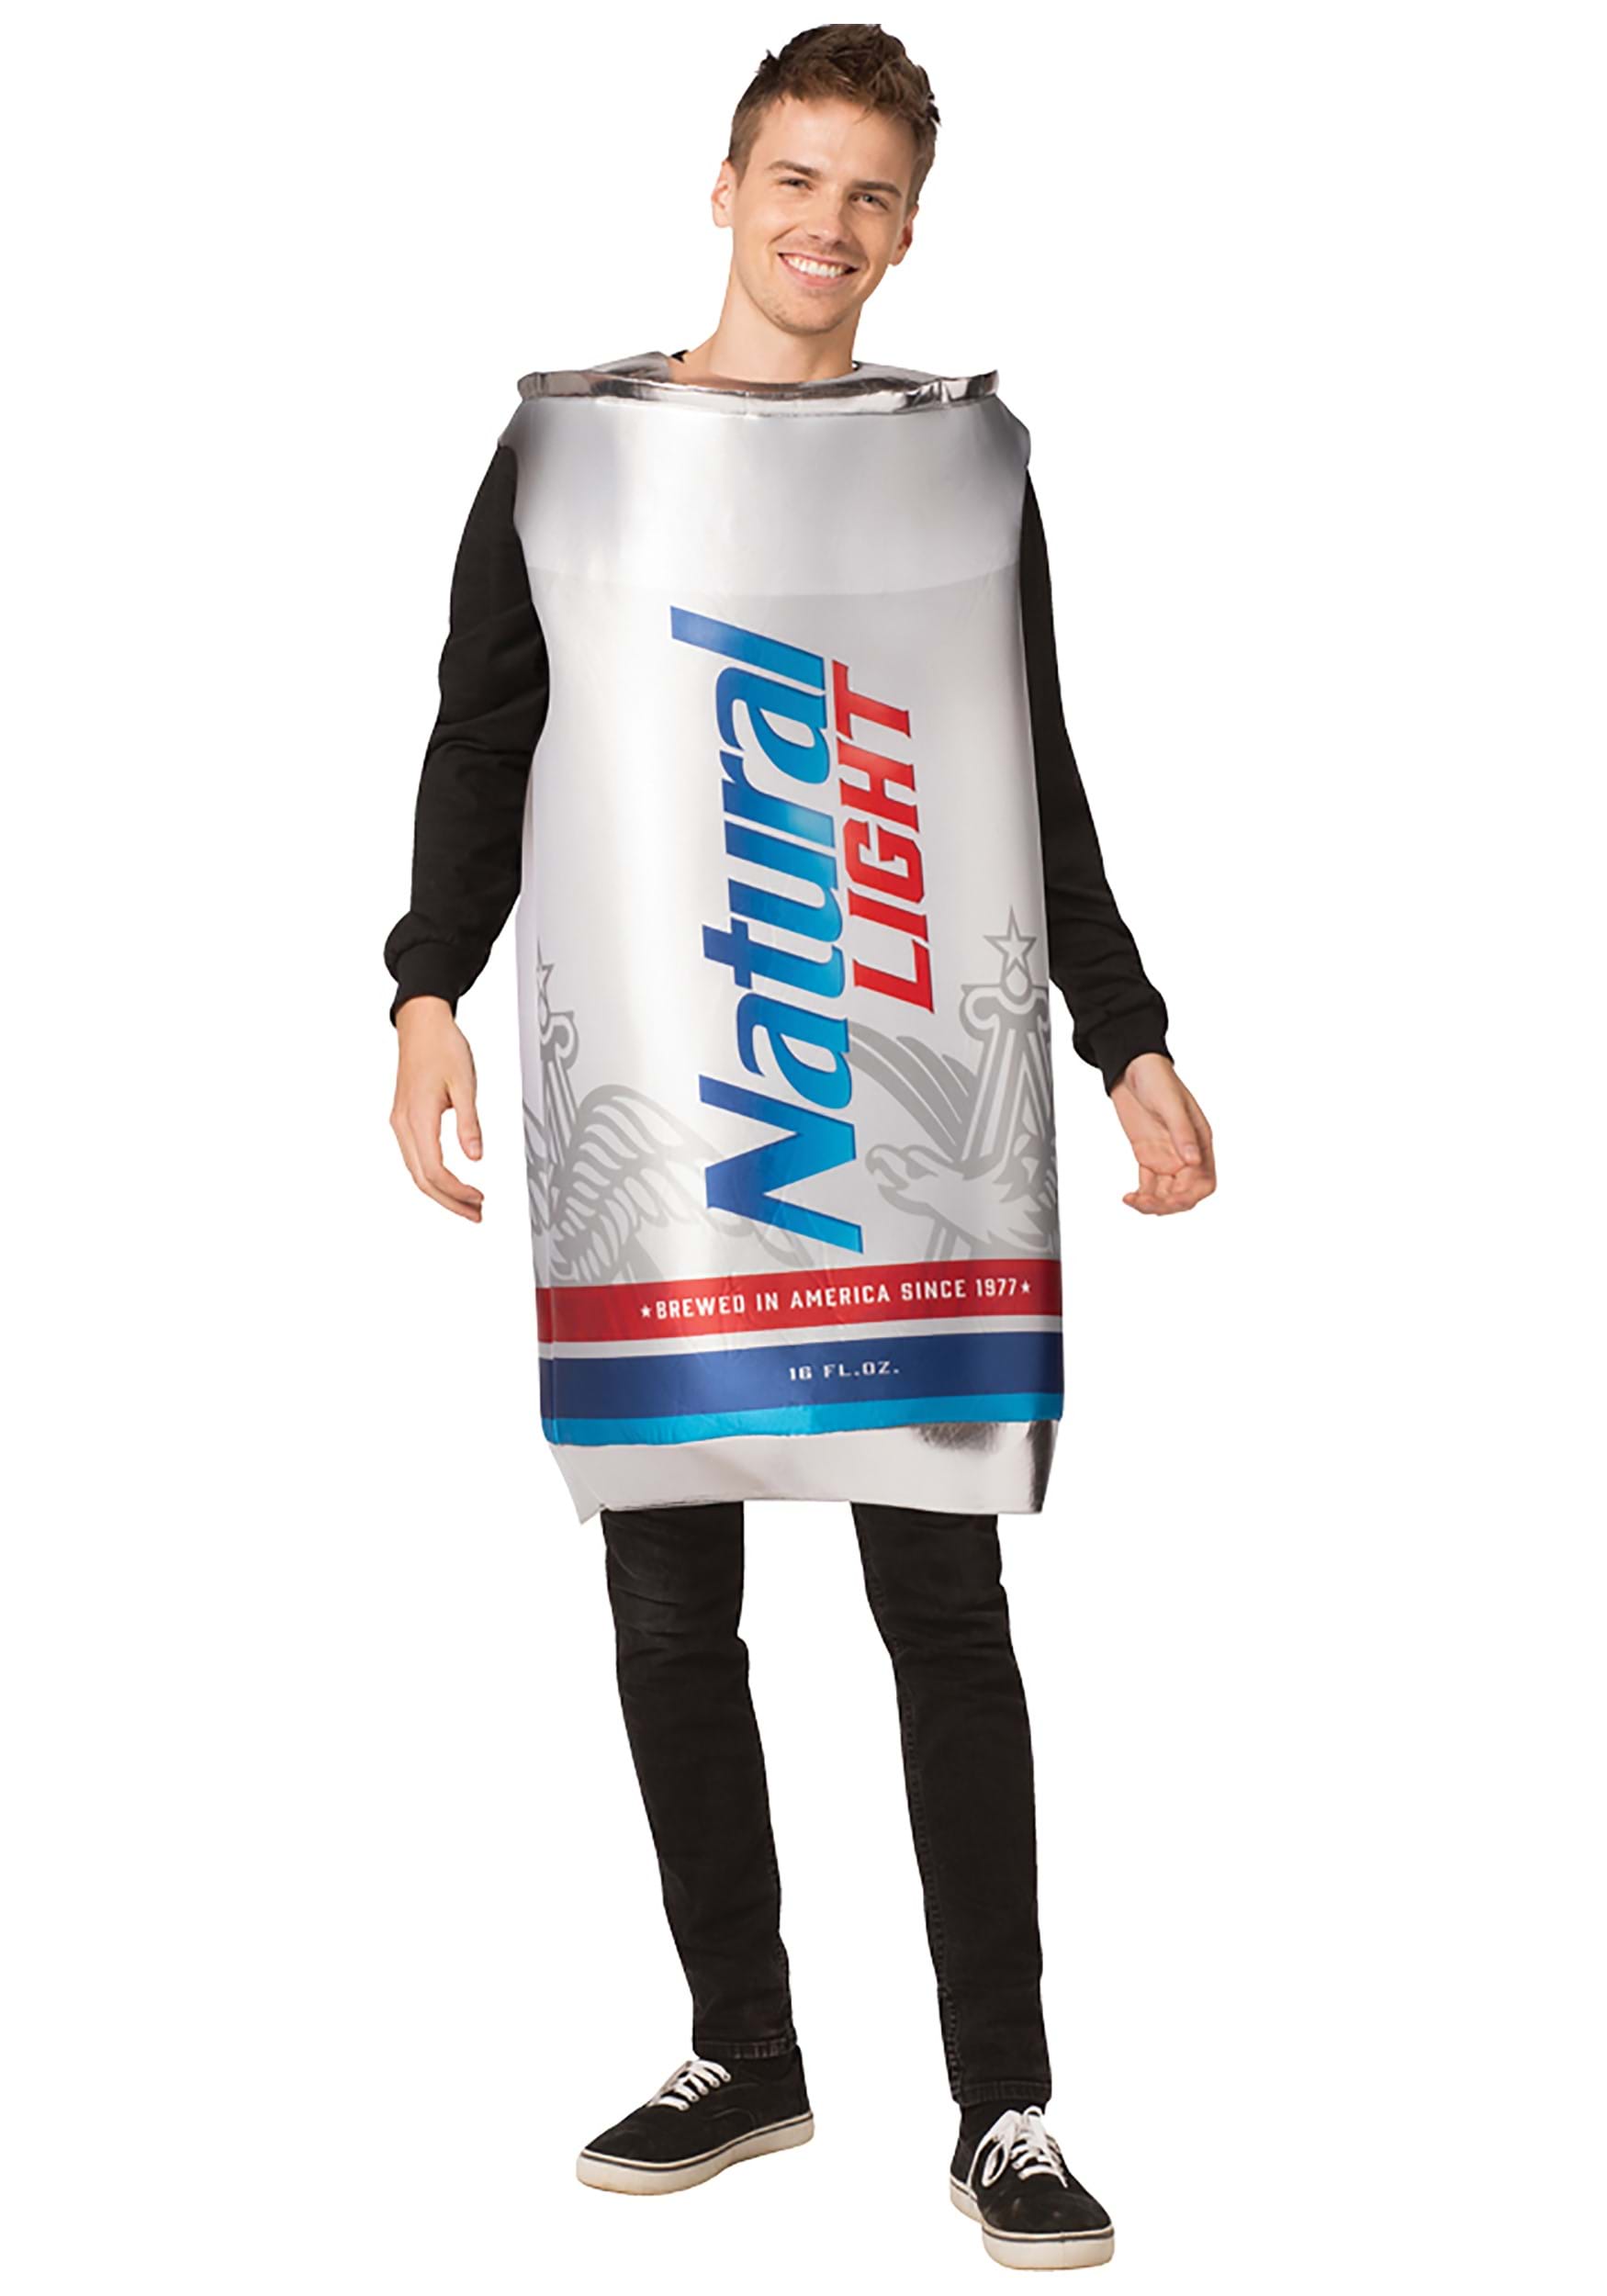 Natural Light Can Adult Costume